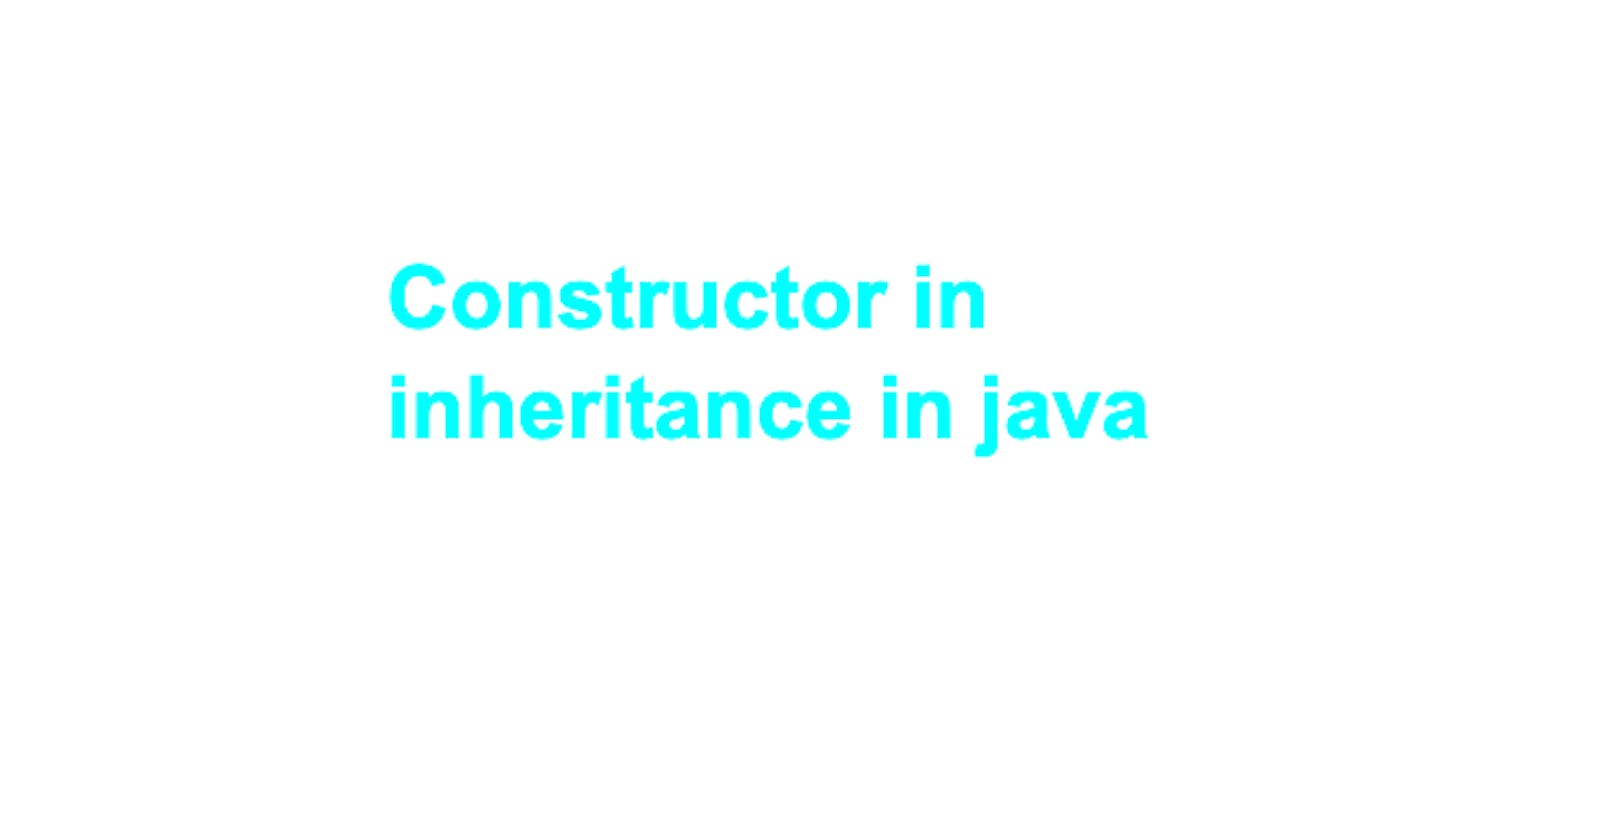 Why do we need to call super class constructor before subclass object being initialized in Java?